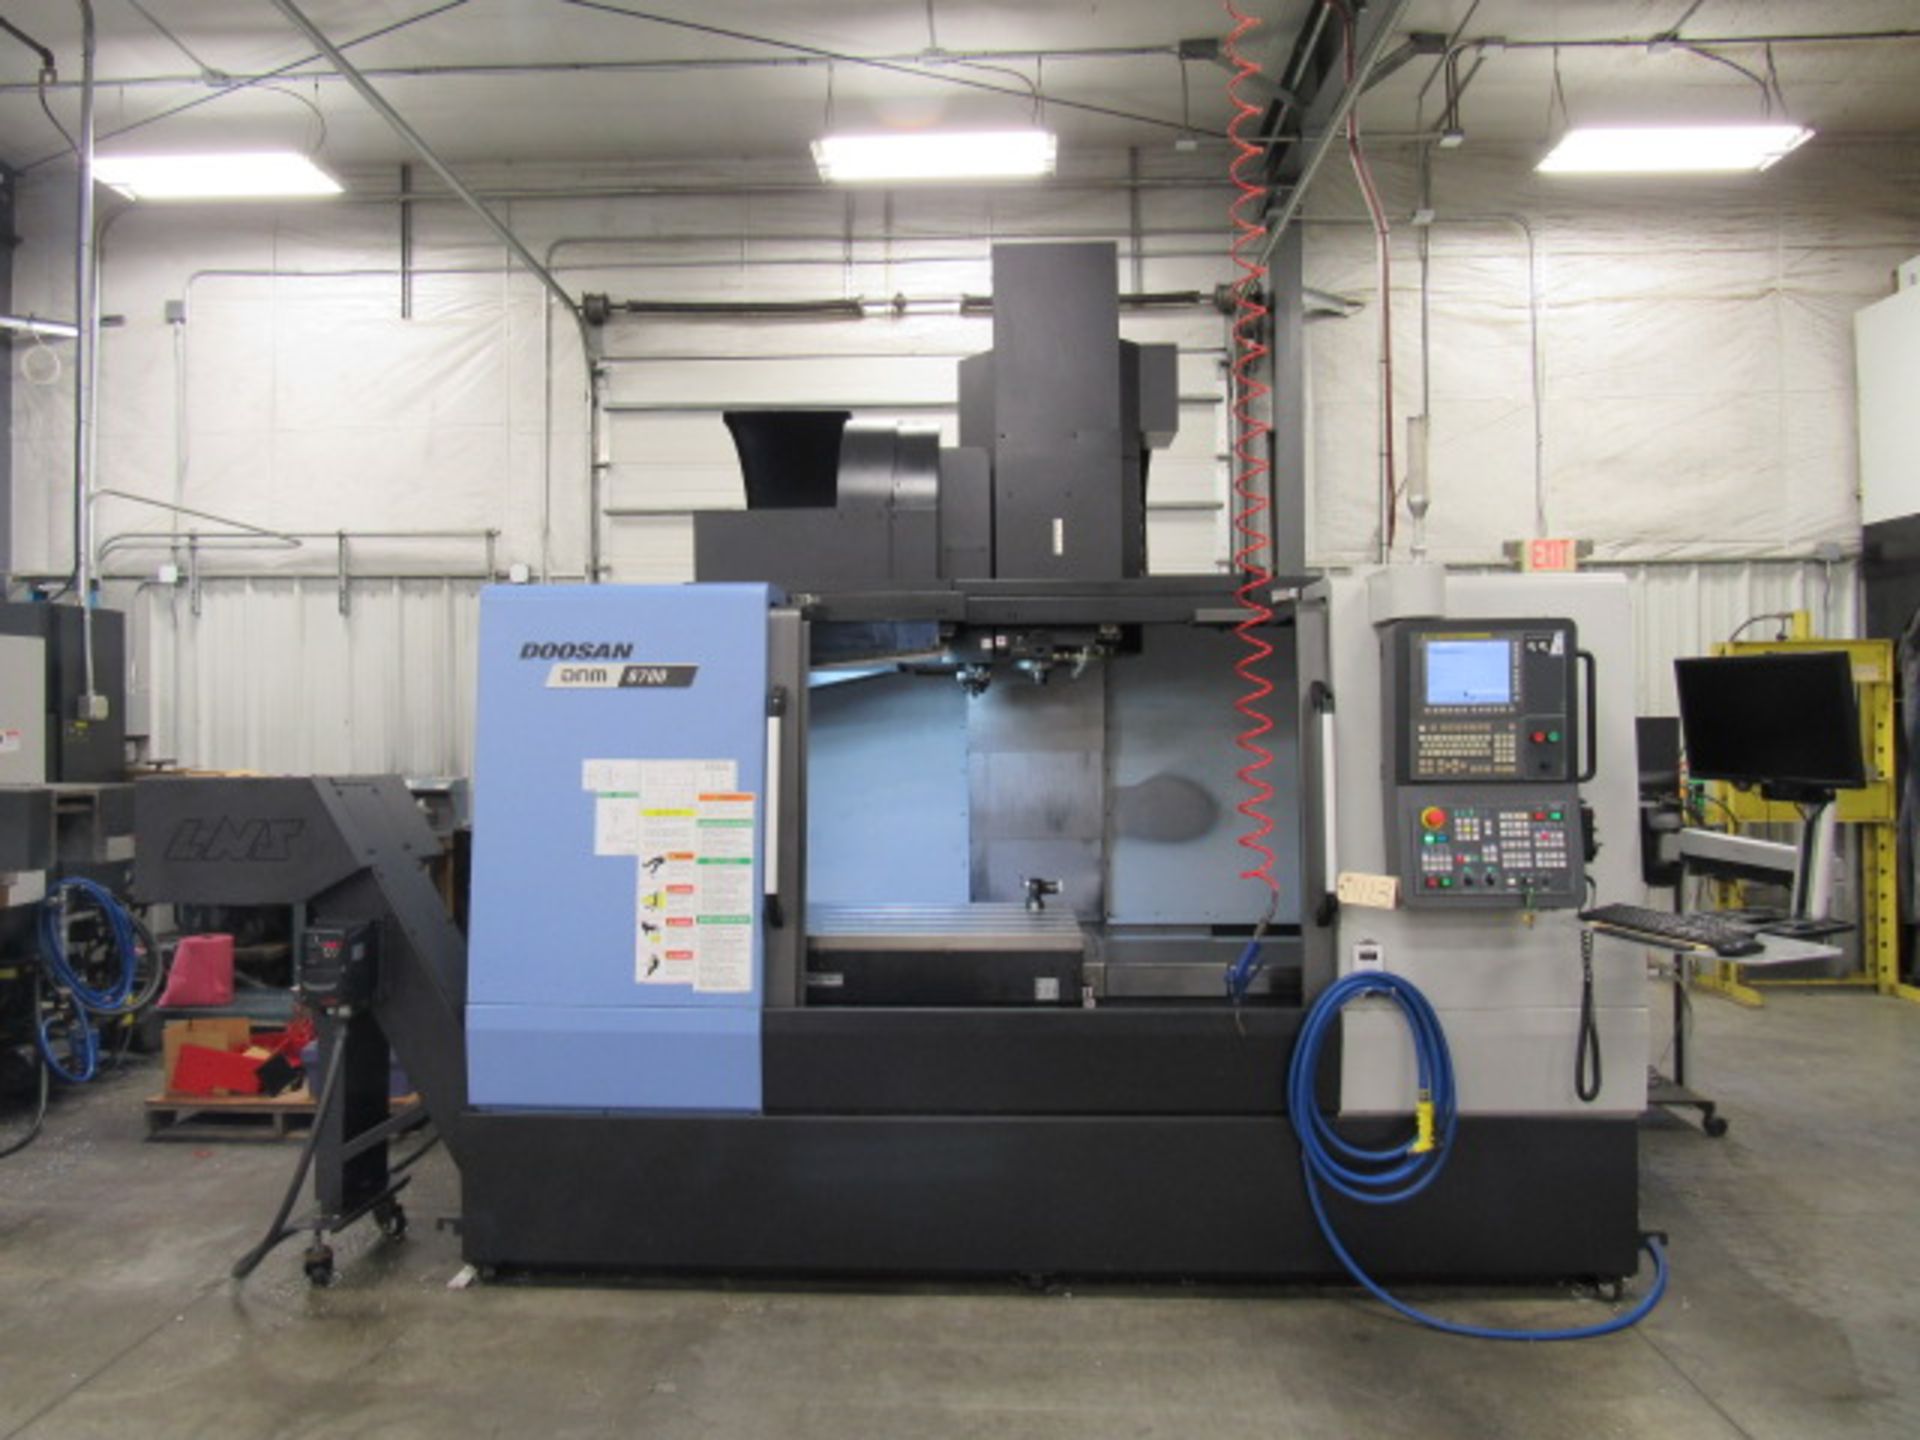 Doosan DNM 6700 CNC Vertical Machining Center with 59.1'' x 26.4'' Table, Big Plus #40, Spindle - Image 9 of 9